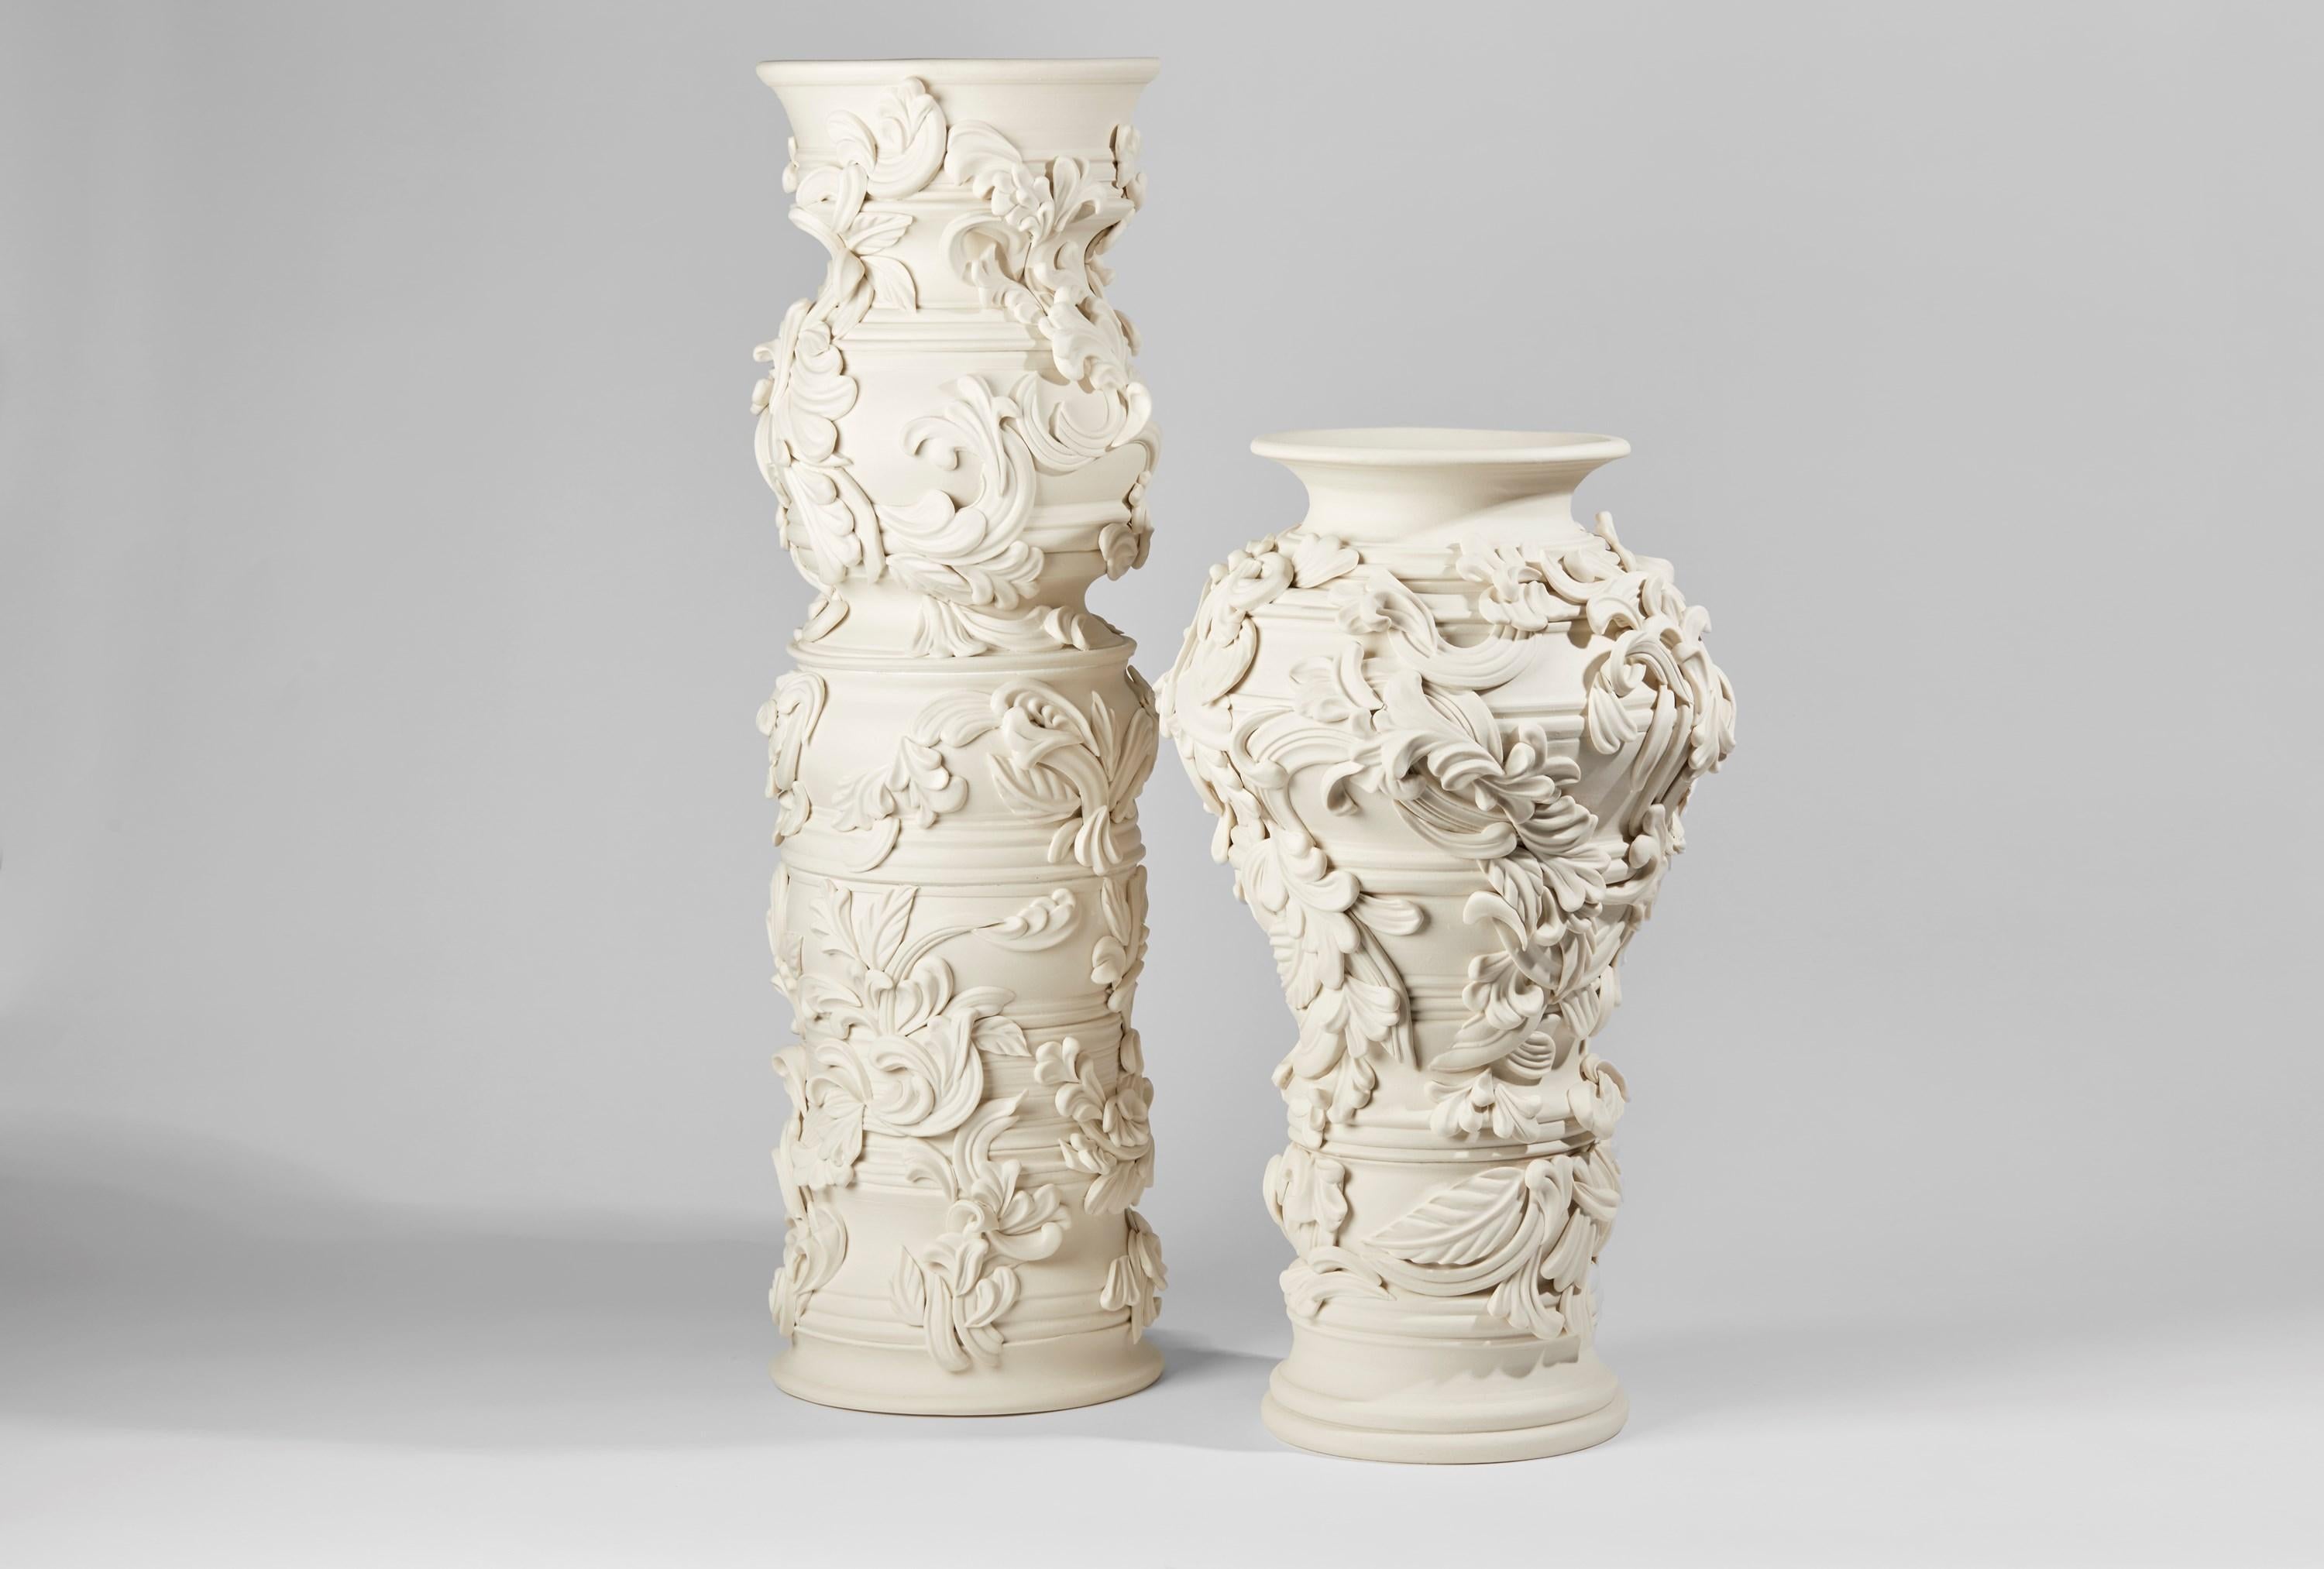 Hand-Crafted  Promenade V, a Unique Ceramic Sculptural Tall Vase in Porcelain by Jo Taylor For Sale